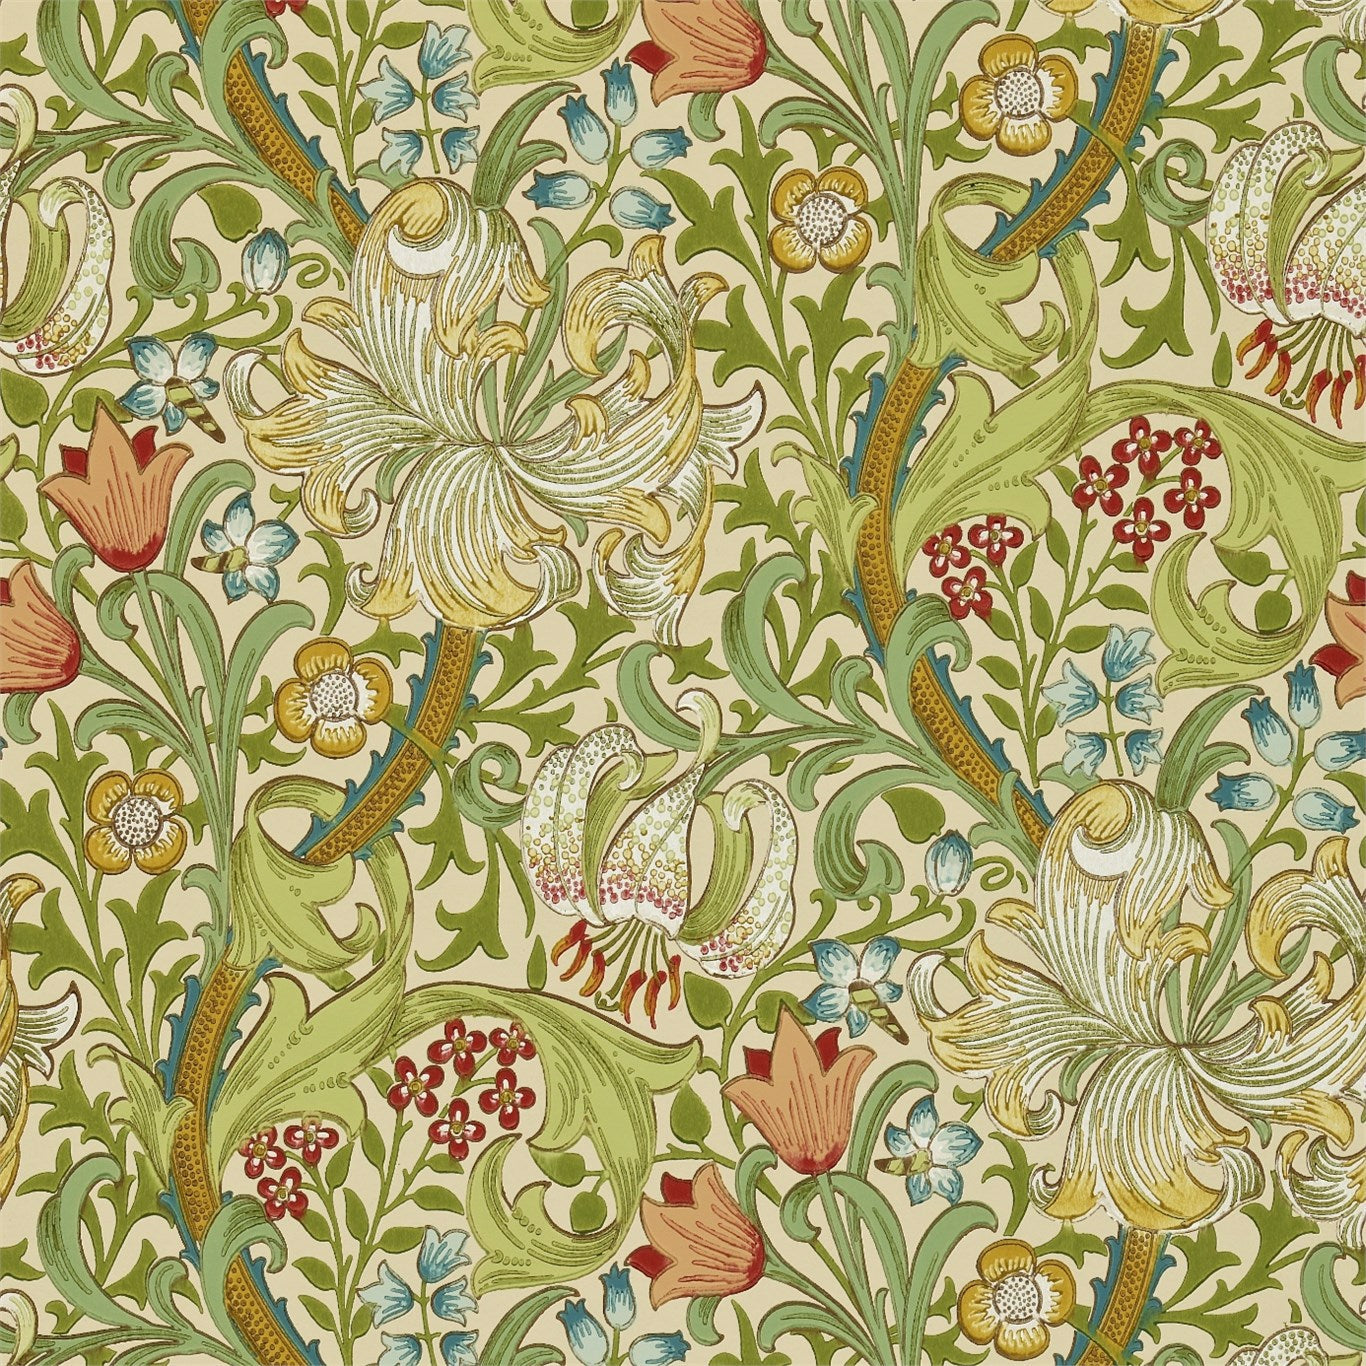 Golden Lily Pale Biscuit Wallpaper DMCW210431 by Morris & Co